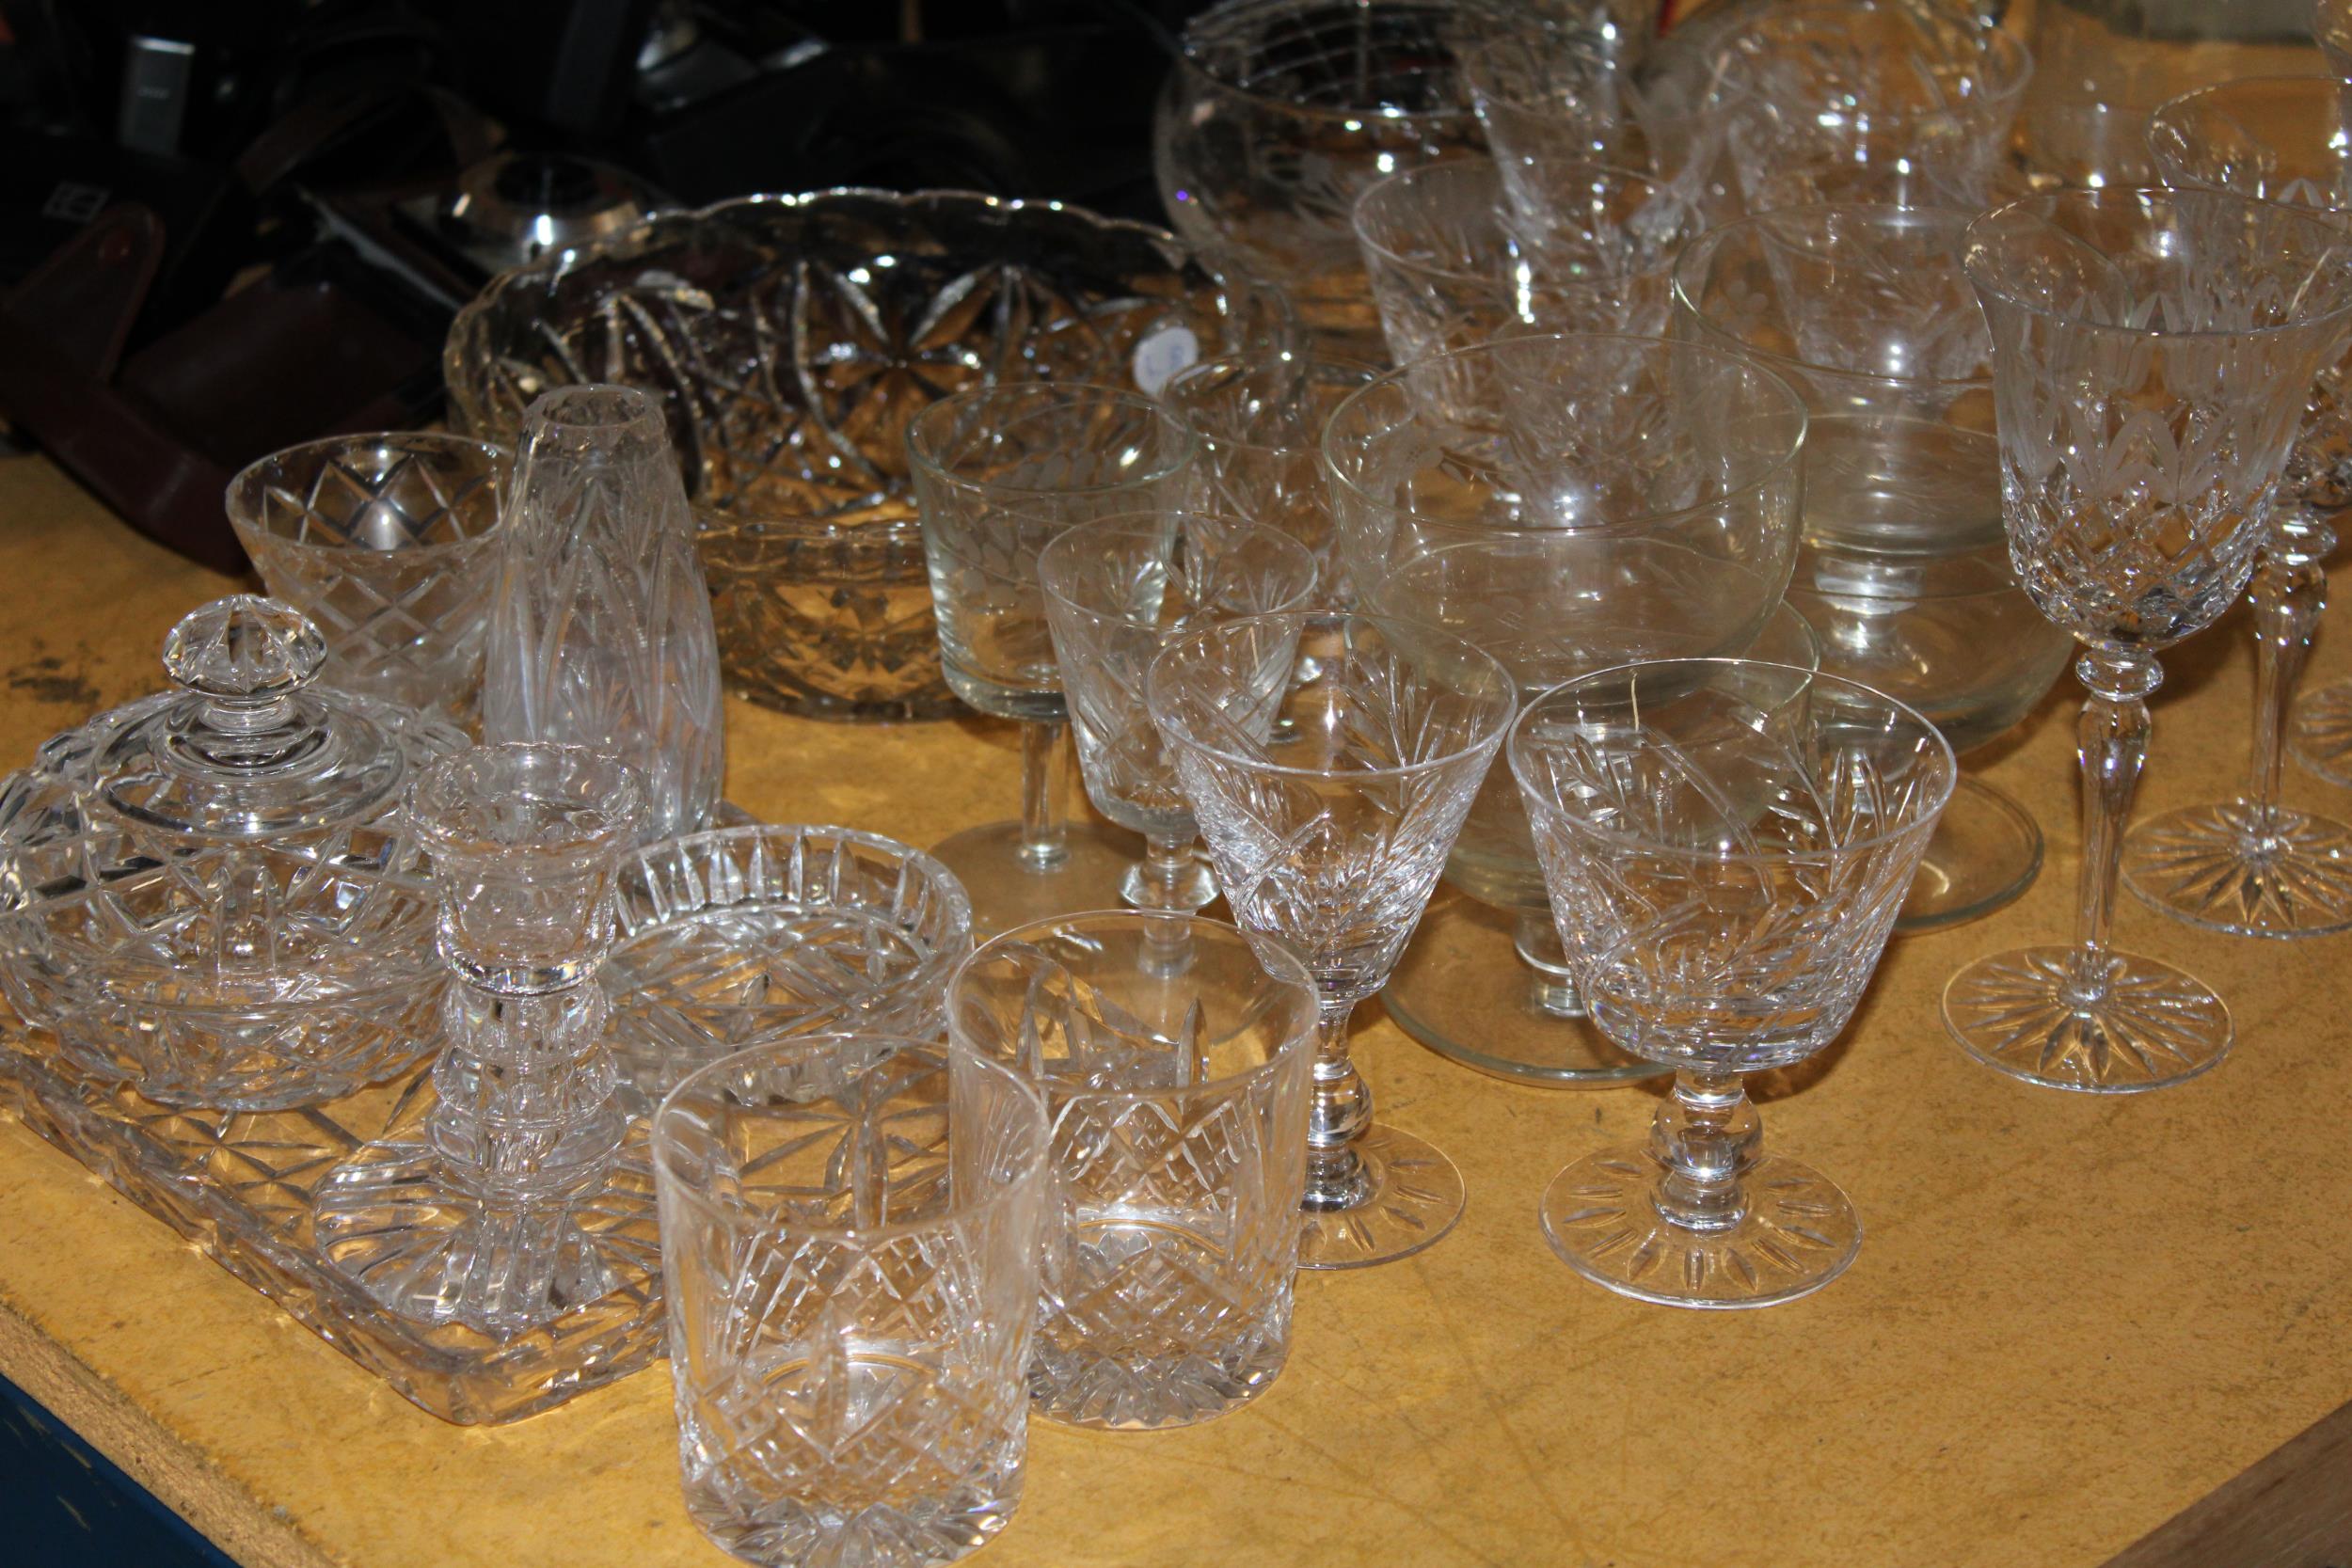 A LARGE QUANTITY OF GLASSWARE TO INCLUDE BOWLS, DECANTERS, A DRESSING TABLE SET, WINE GLASSES, - Image 4 of 5